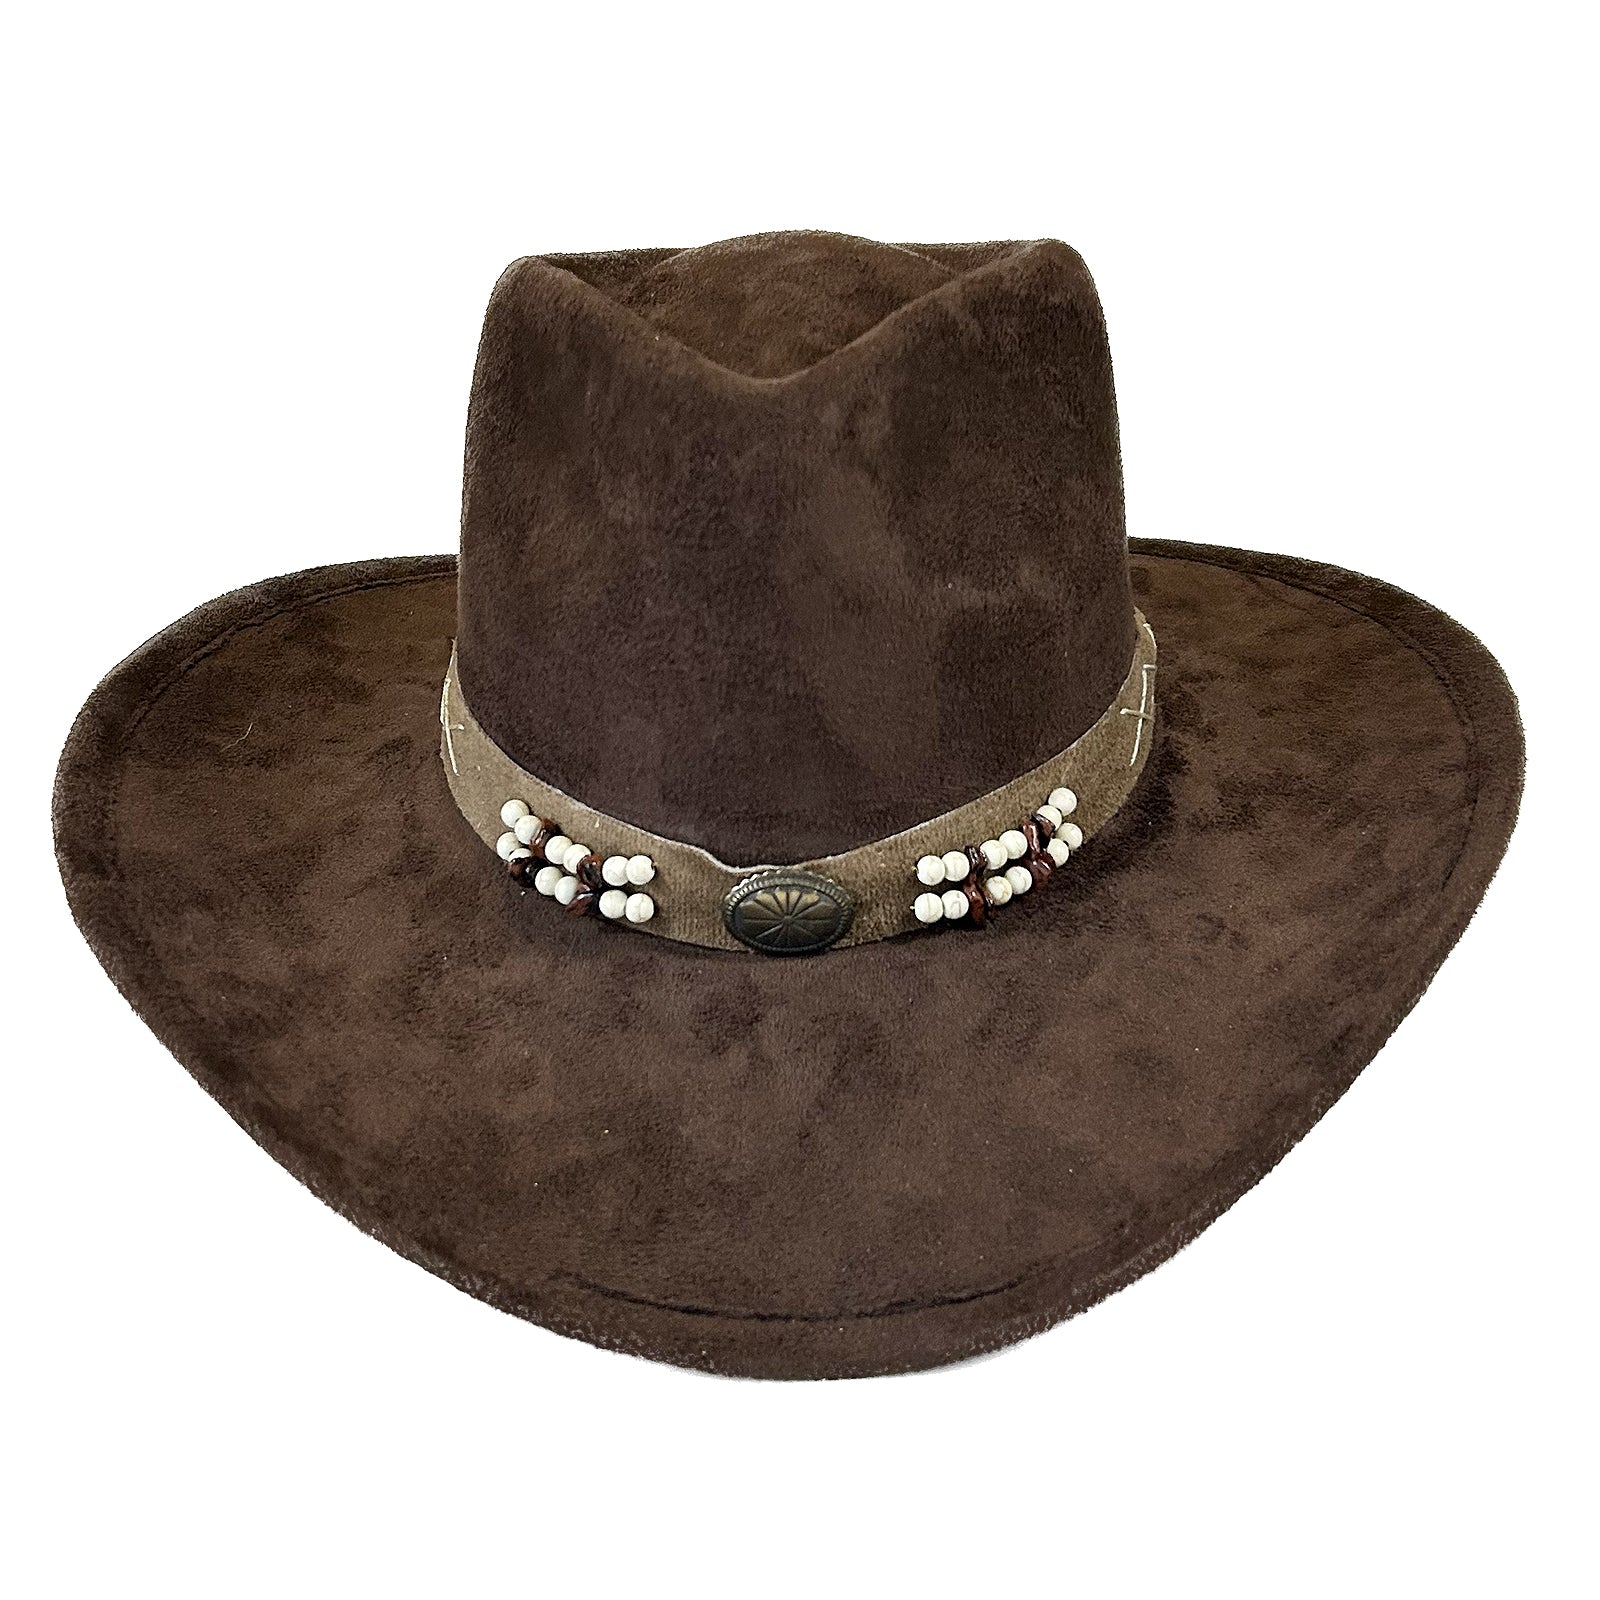 Suede Canyon Western Cowboy Hat in Brown